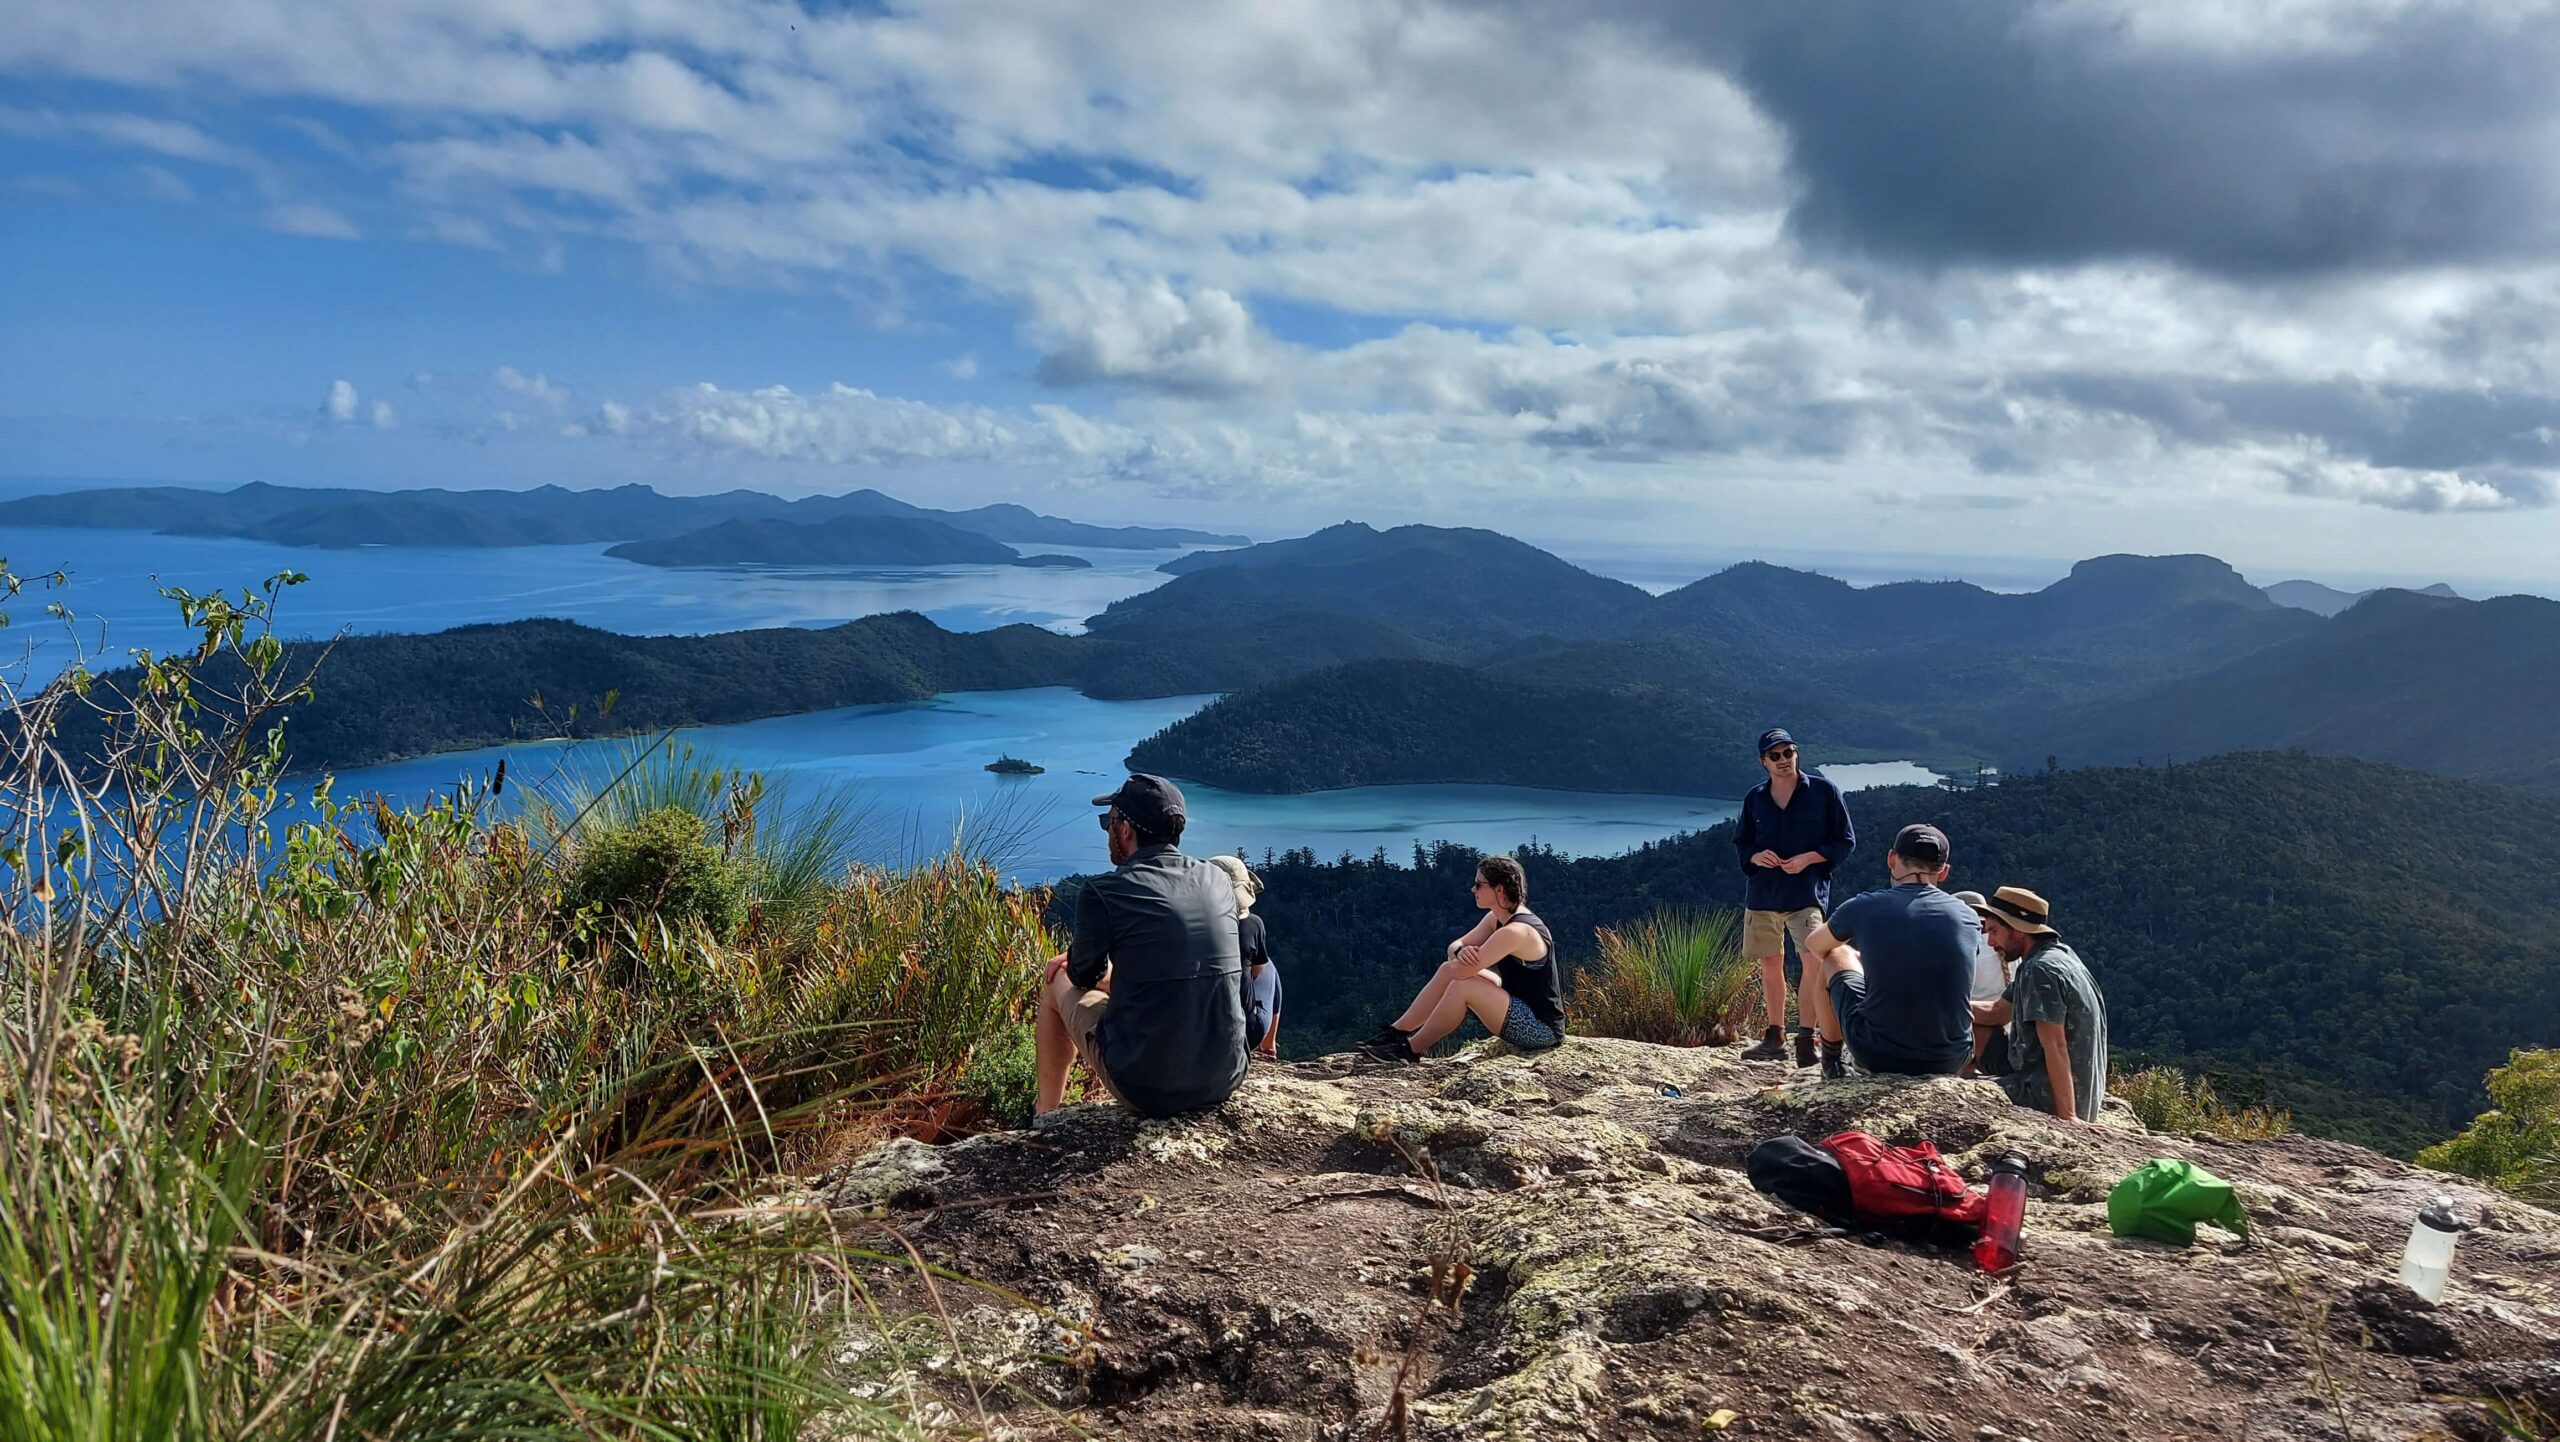 The top of Whitsunday Peak, Whitsunday Islands National Park. Photo taken by Lizzie.